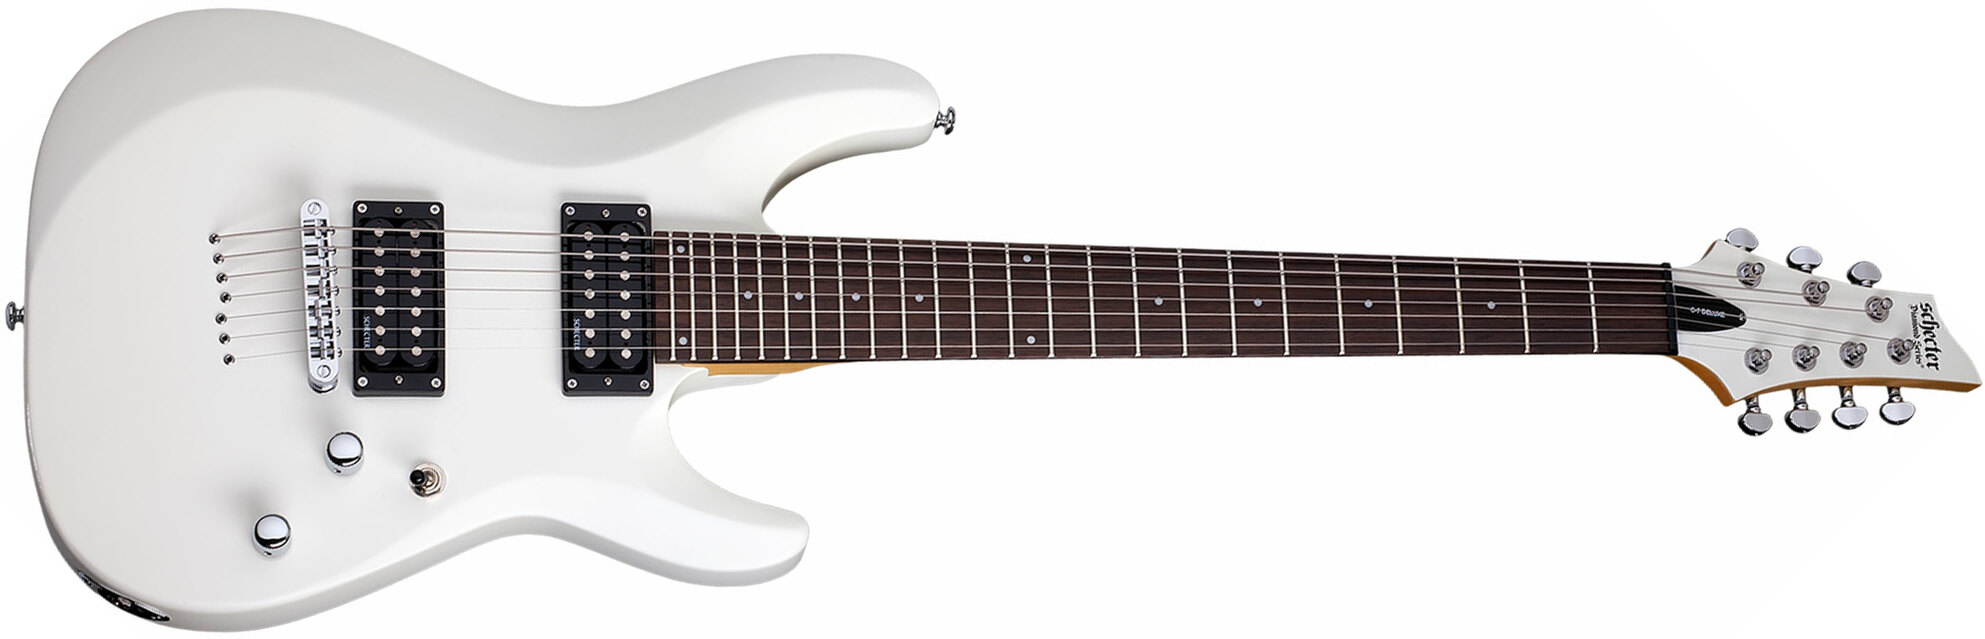 Schecter C-7 Deluxe 7c 2h Ht Rw - Satin White - 7 string electric guitar - Main picture